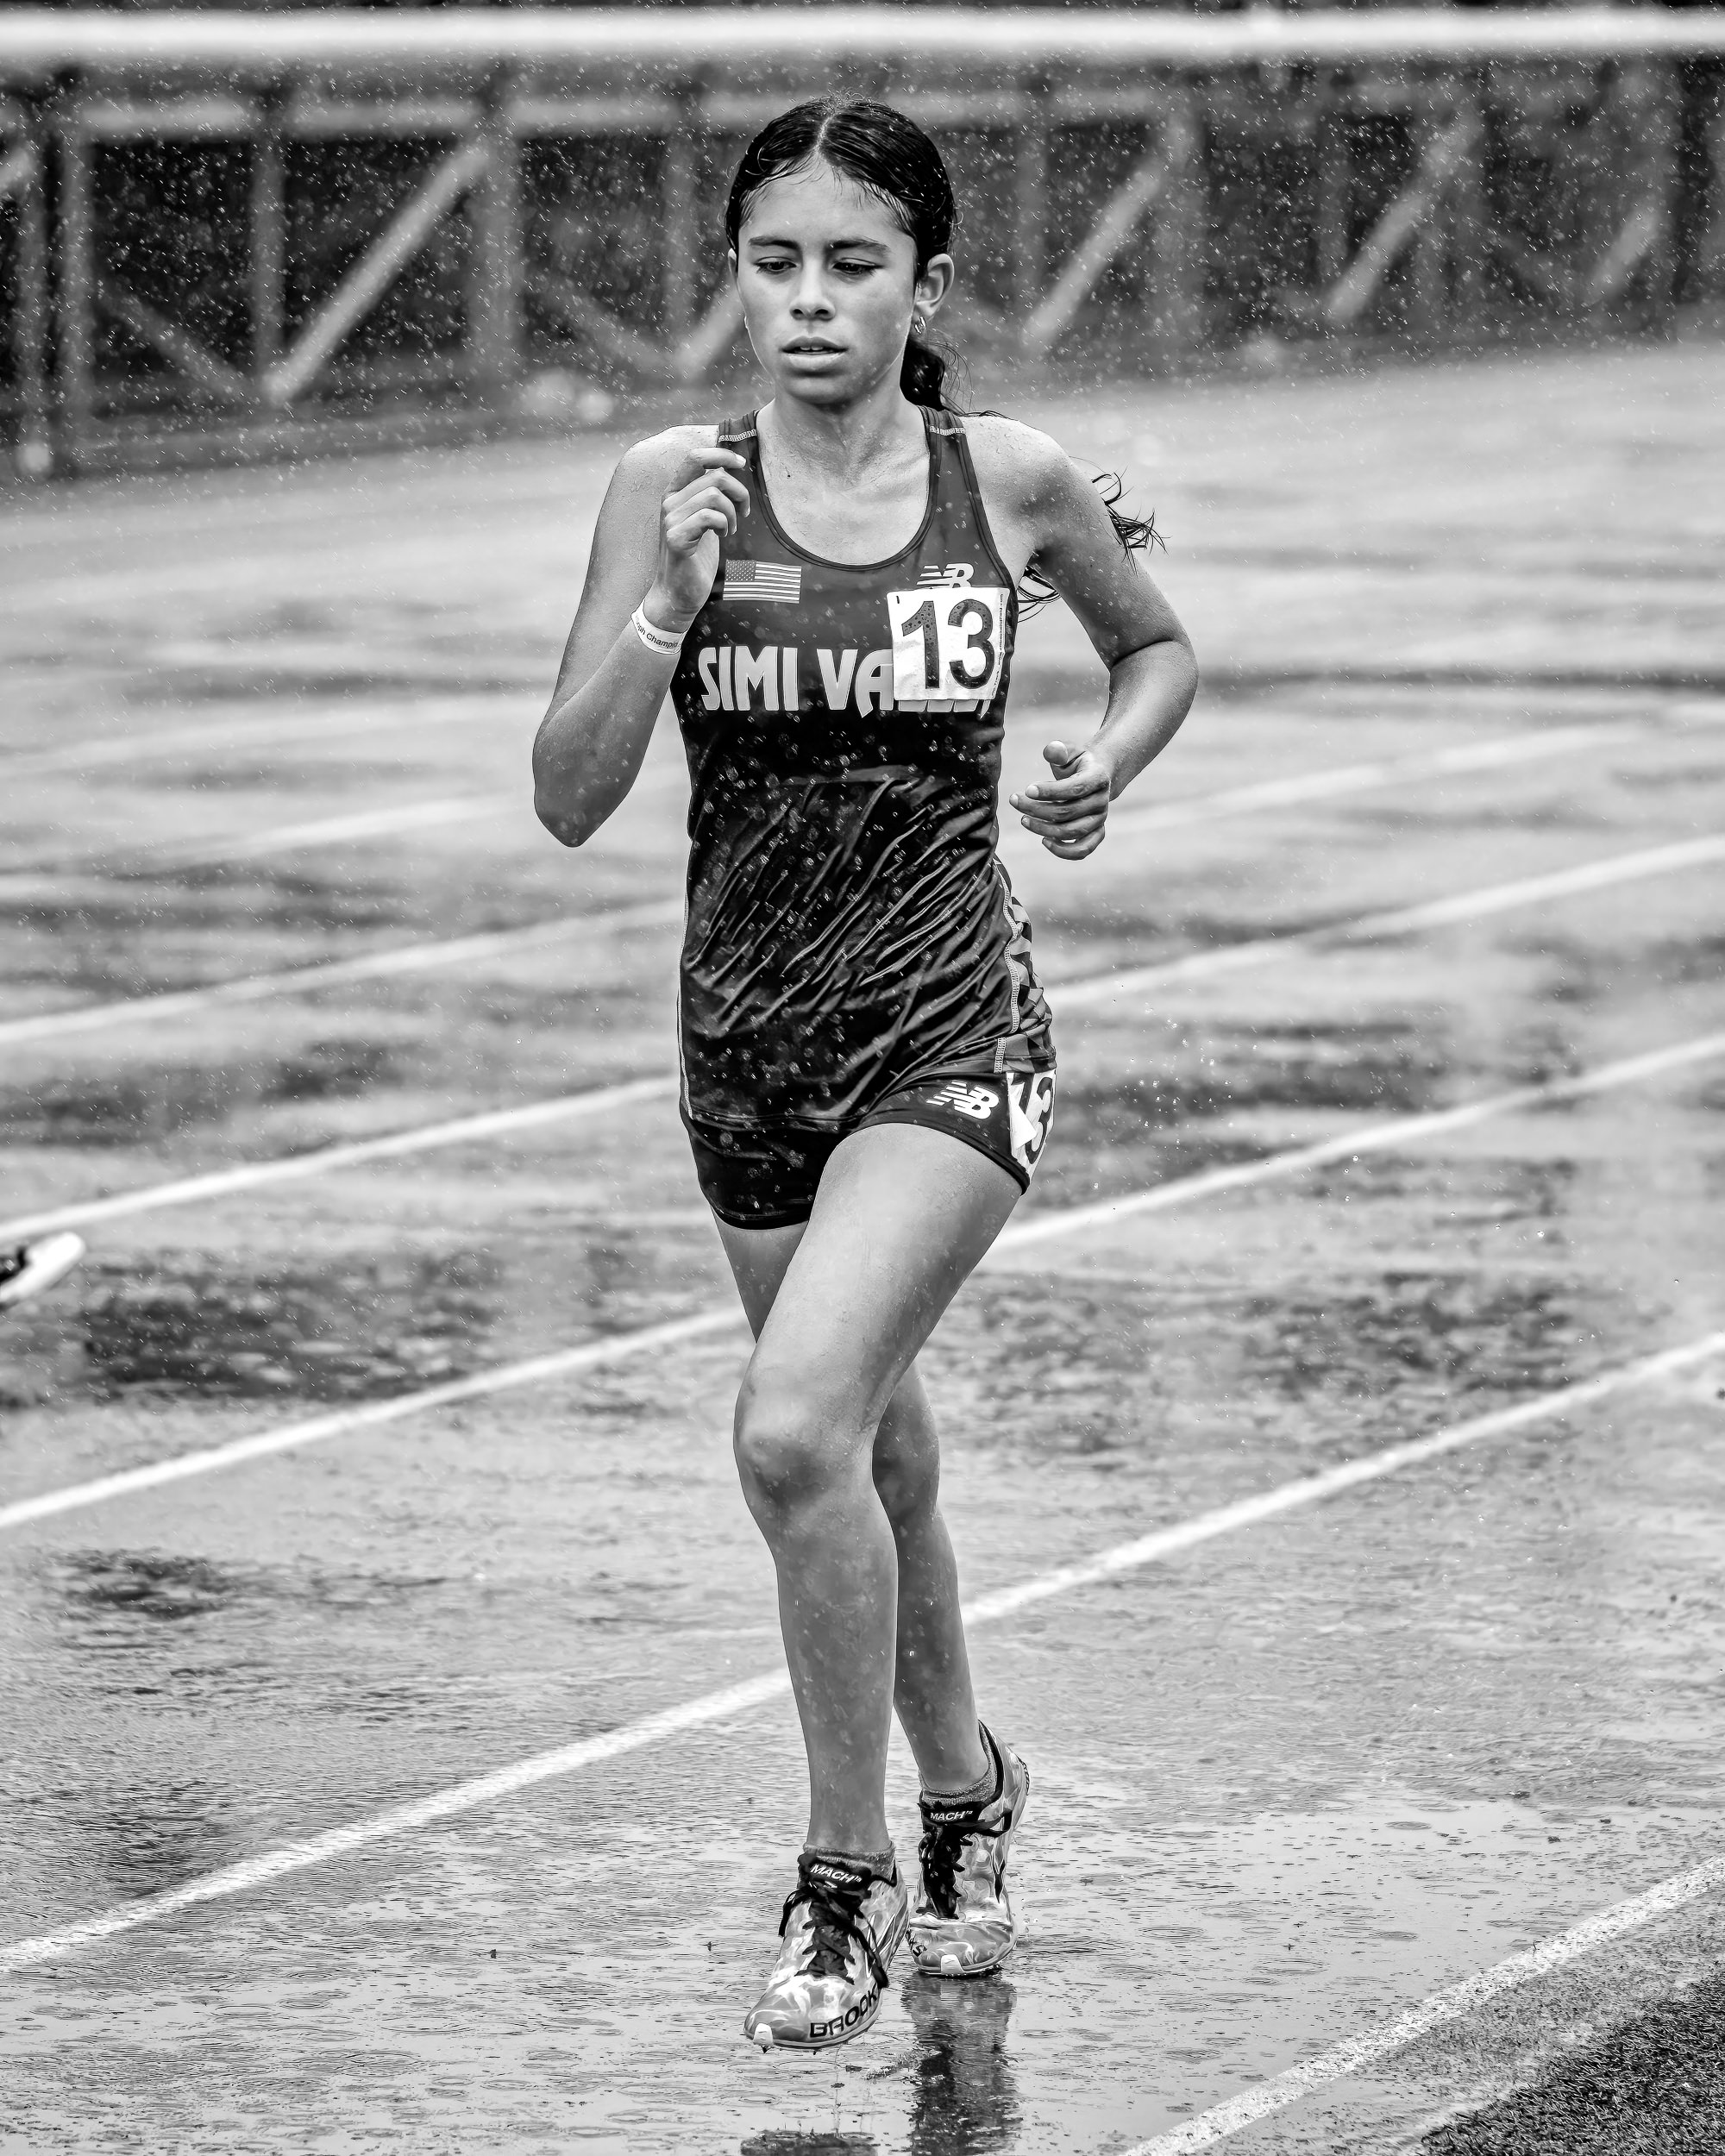 A Stormy Track Meet in Black and White